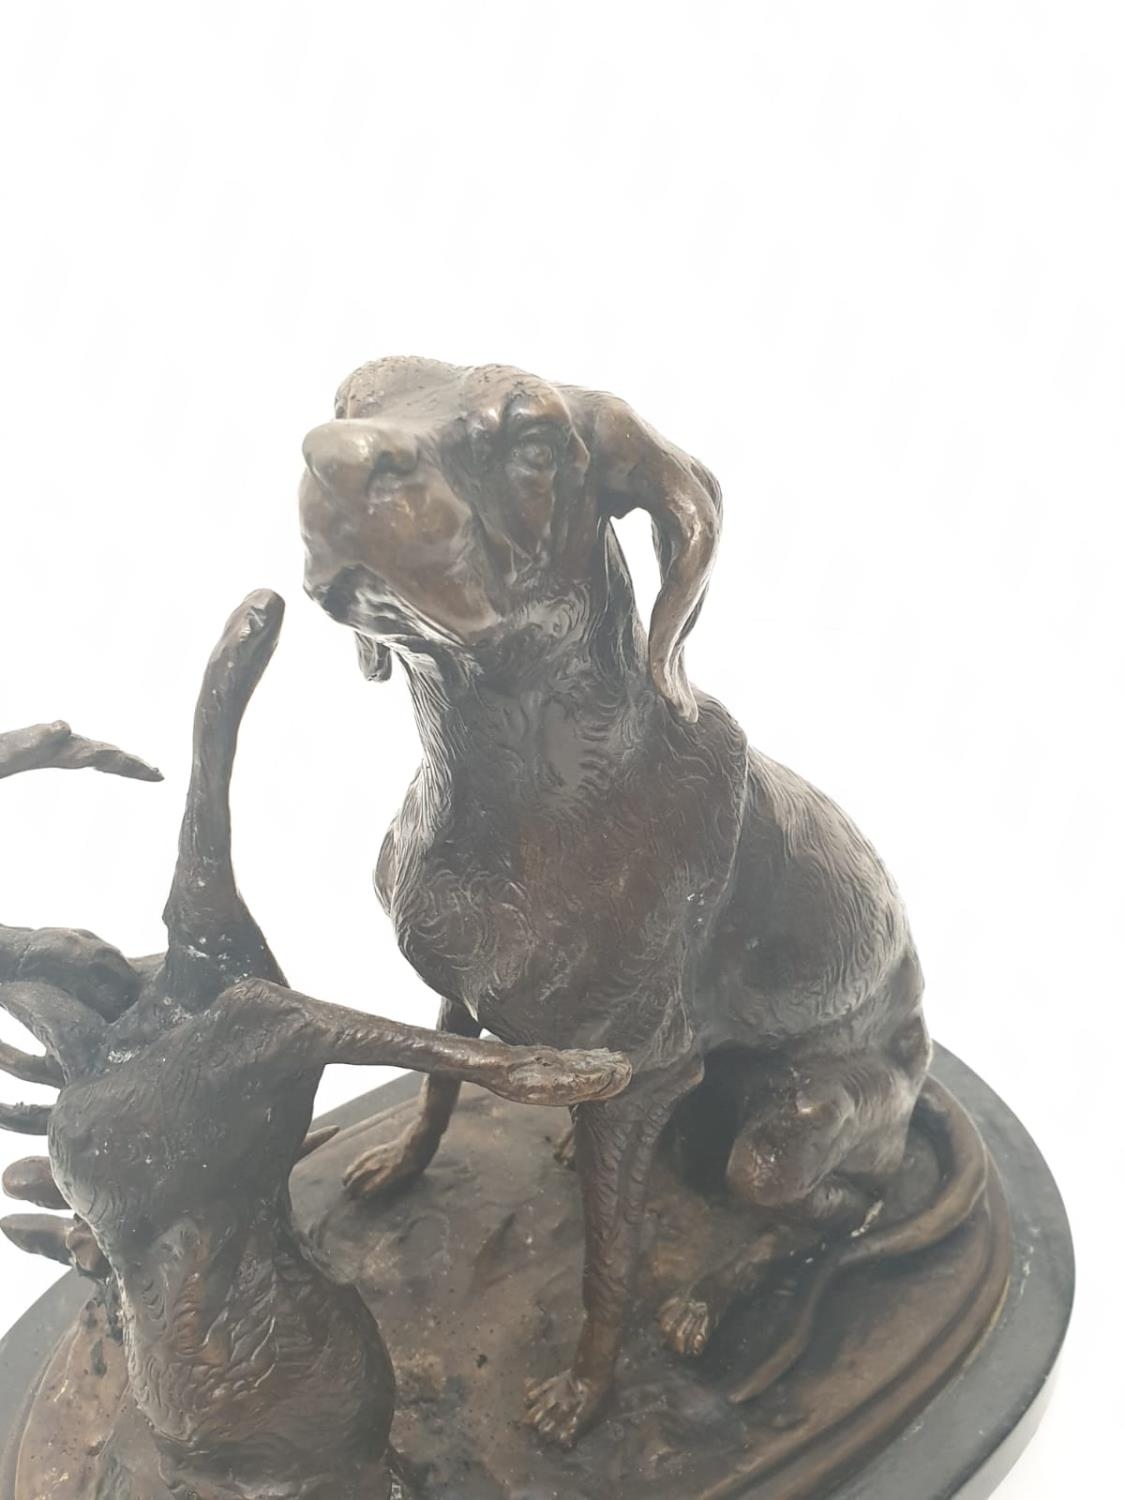 A vintage bronze sculpture of a hunting dog and an unlucky rabbit. 25 x 25 cm. - Image 2 of 6